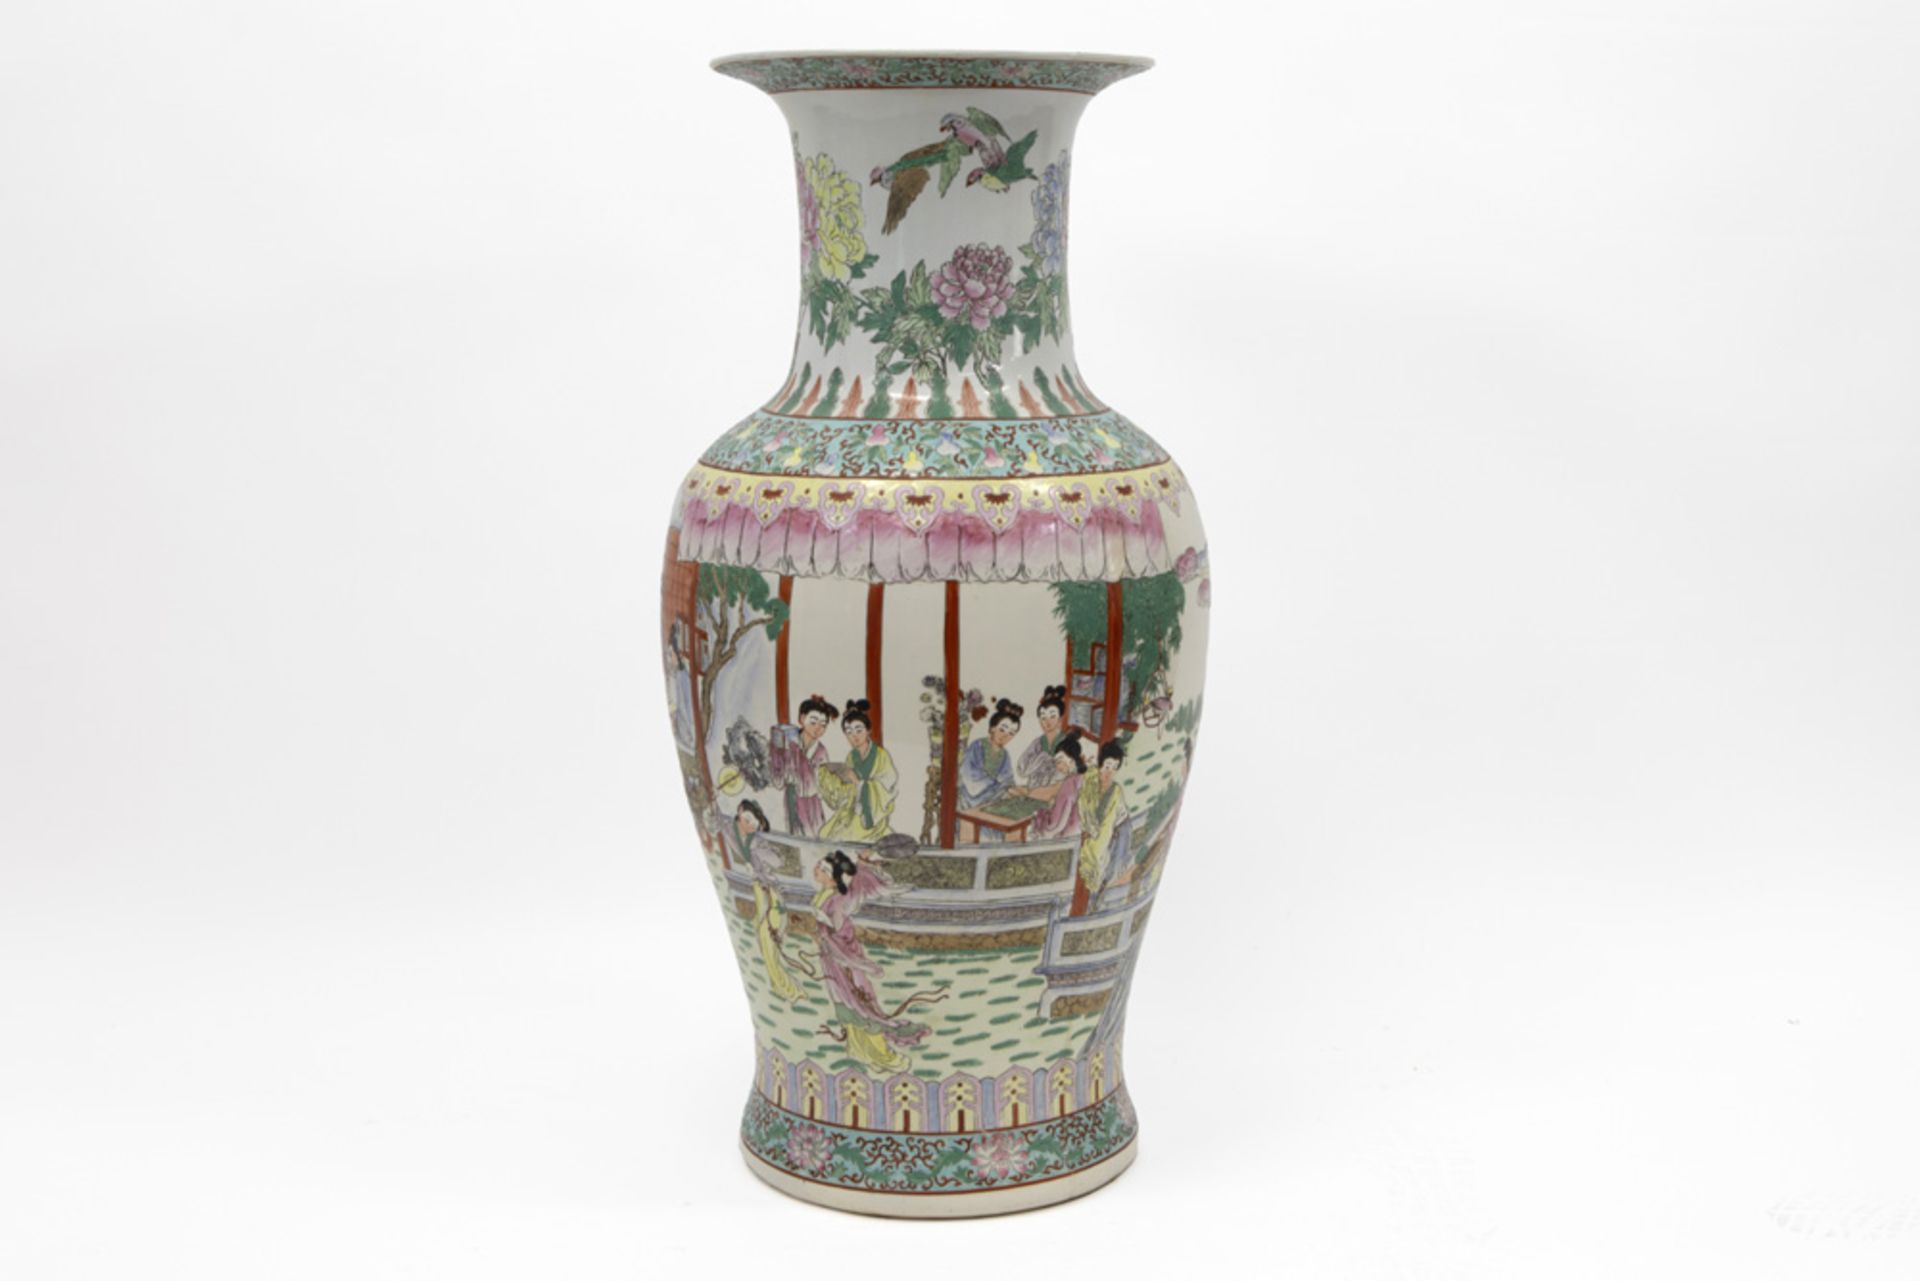 20th Cent. Chinese vase in porcelain with a polychrome decor || 20ste eeuwse Chinese vaas in - Bild 2 aus 6